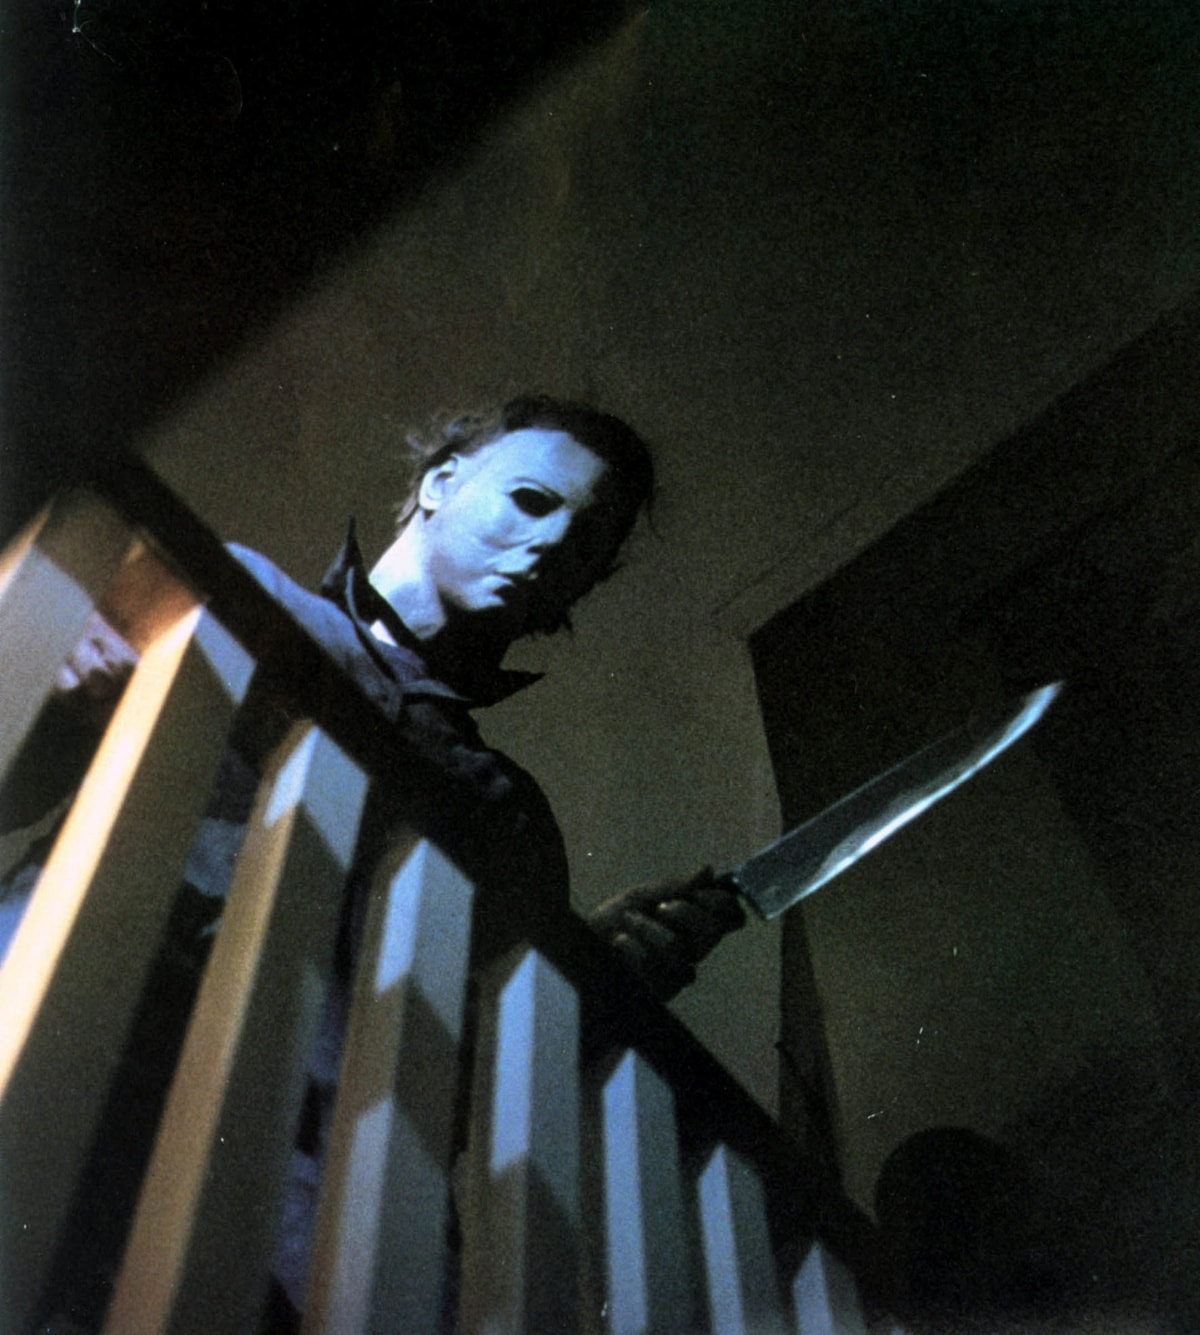 Nick Castle as Michael Myers / The Shape in the 1978 independent slasher film Halloween